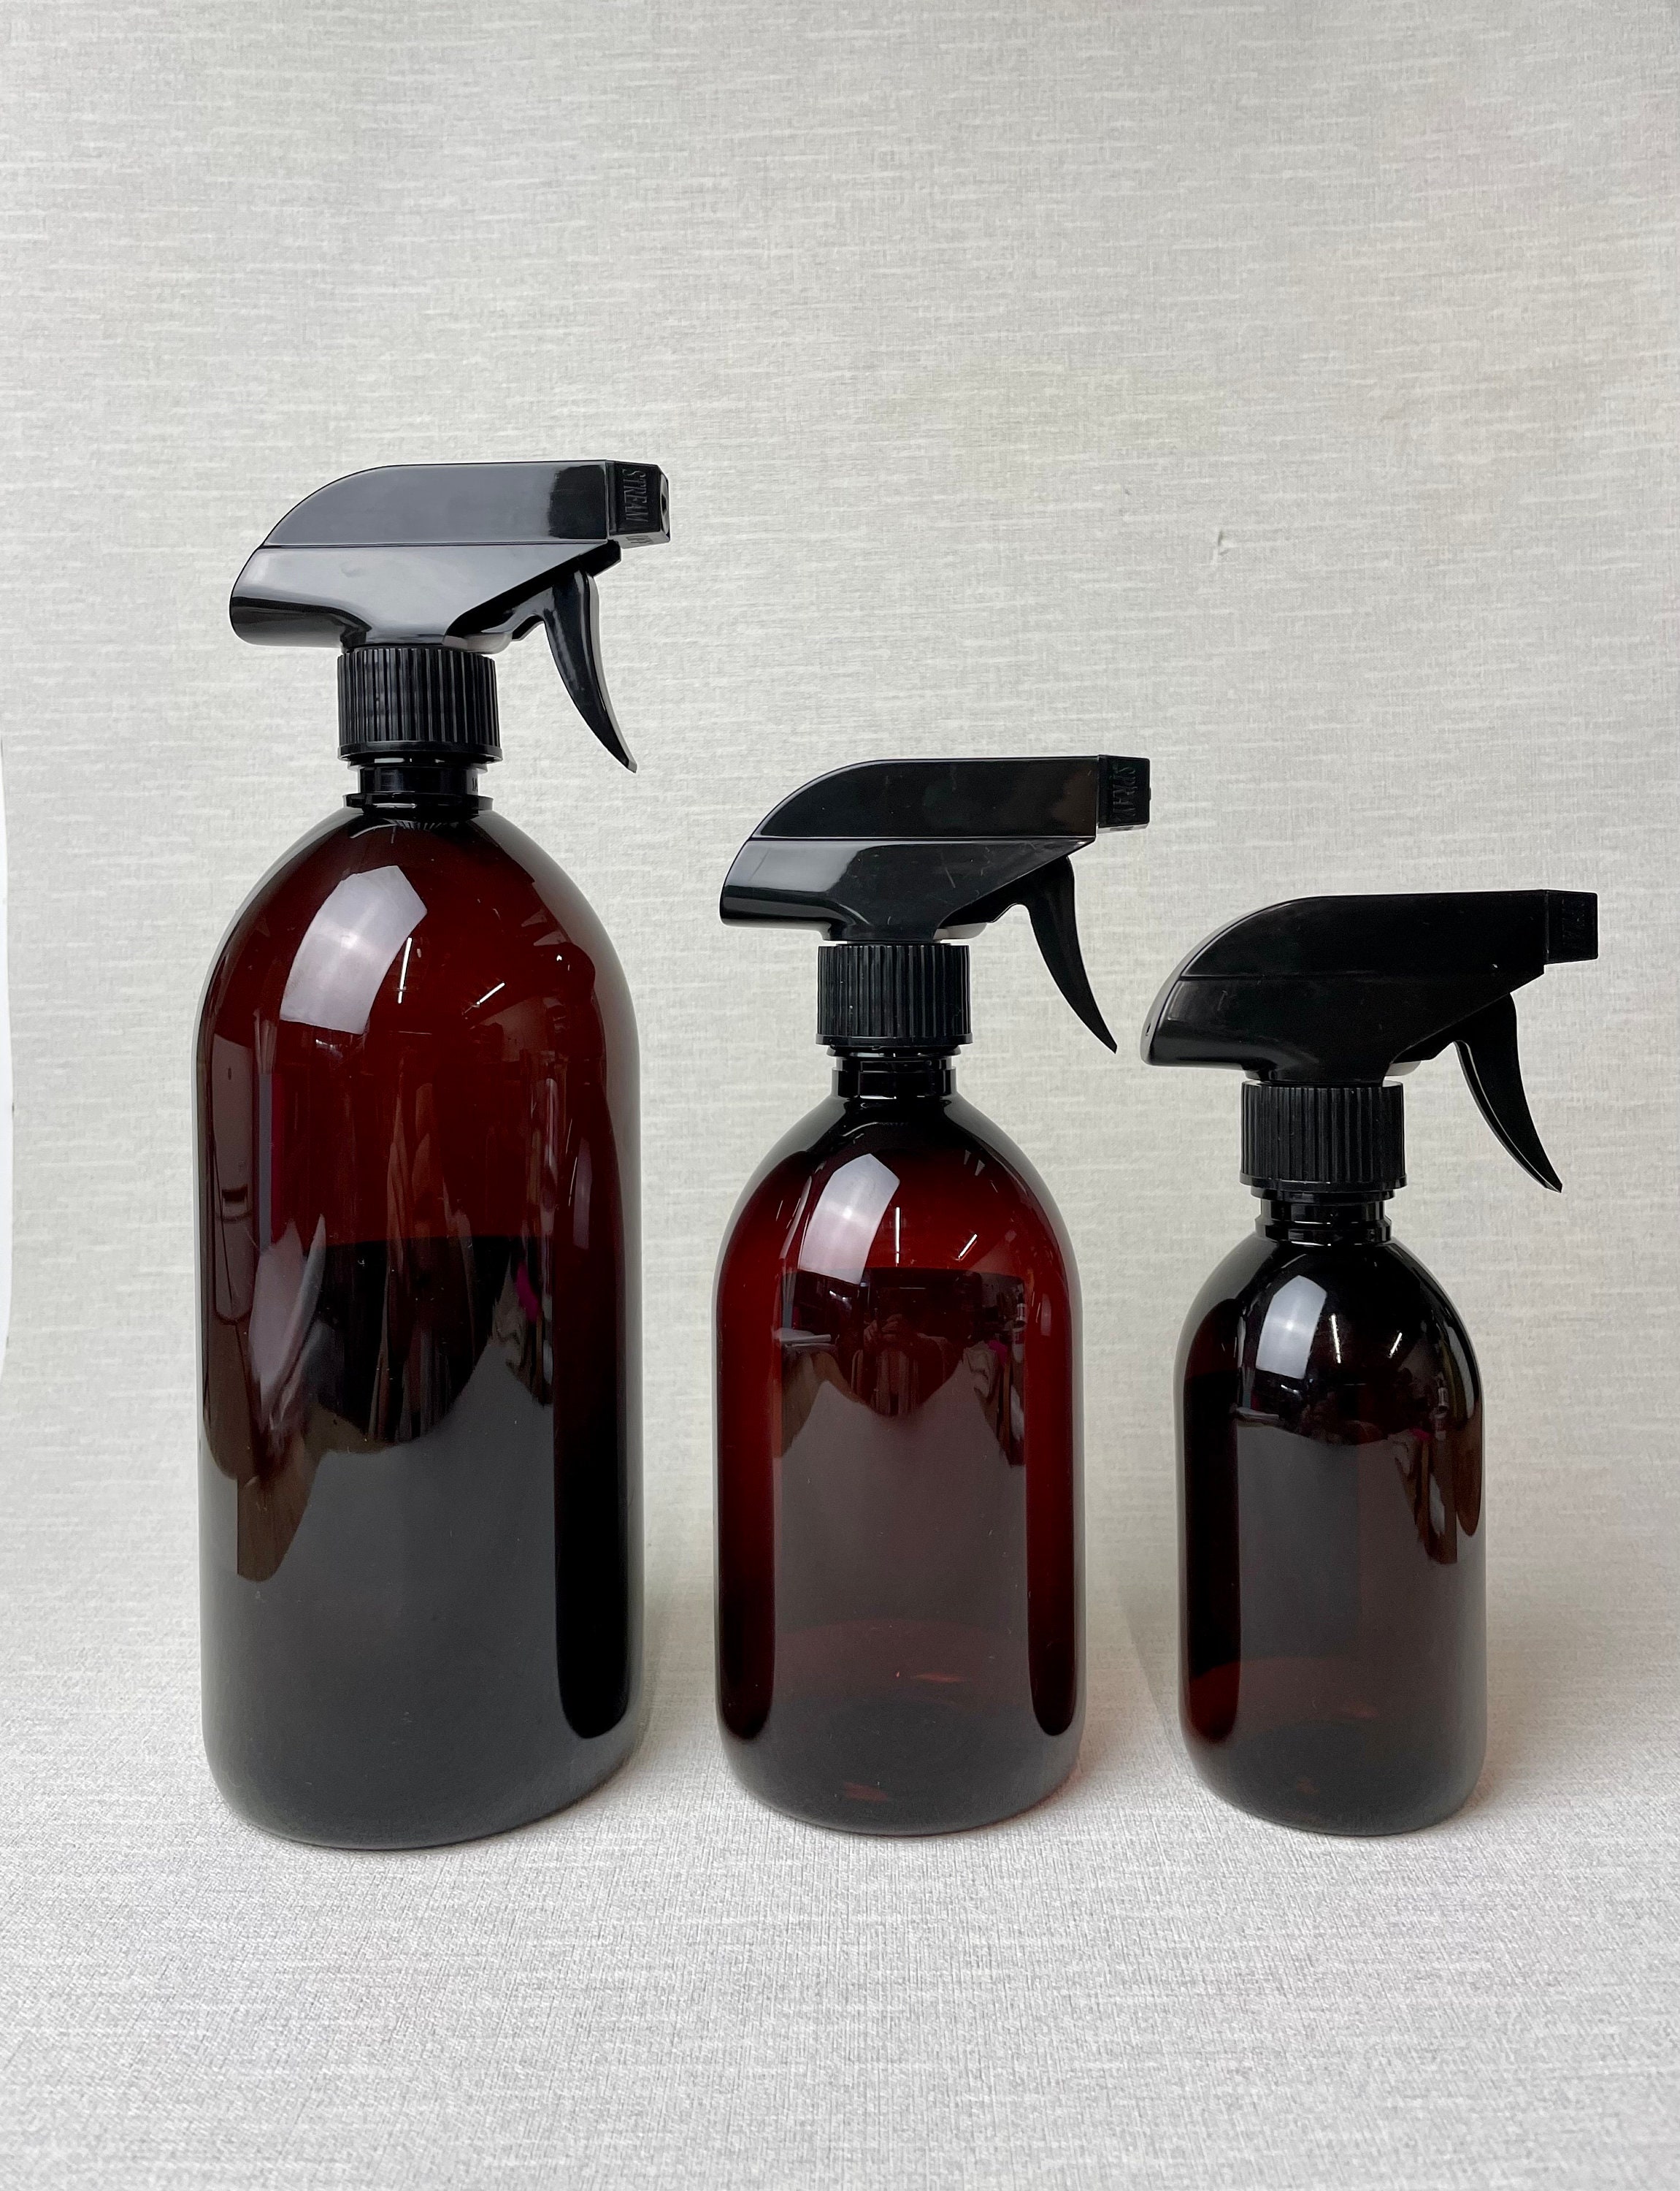 Any of you body guys found some good spray bottles for cleaners?